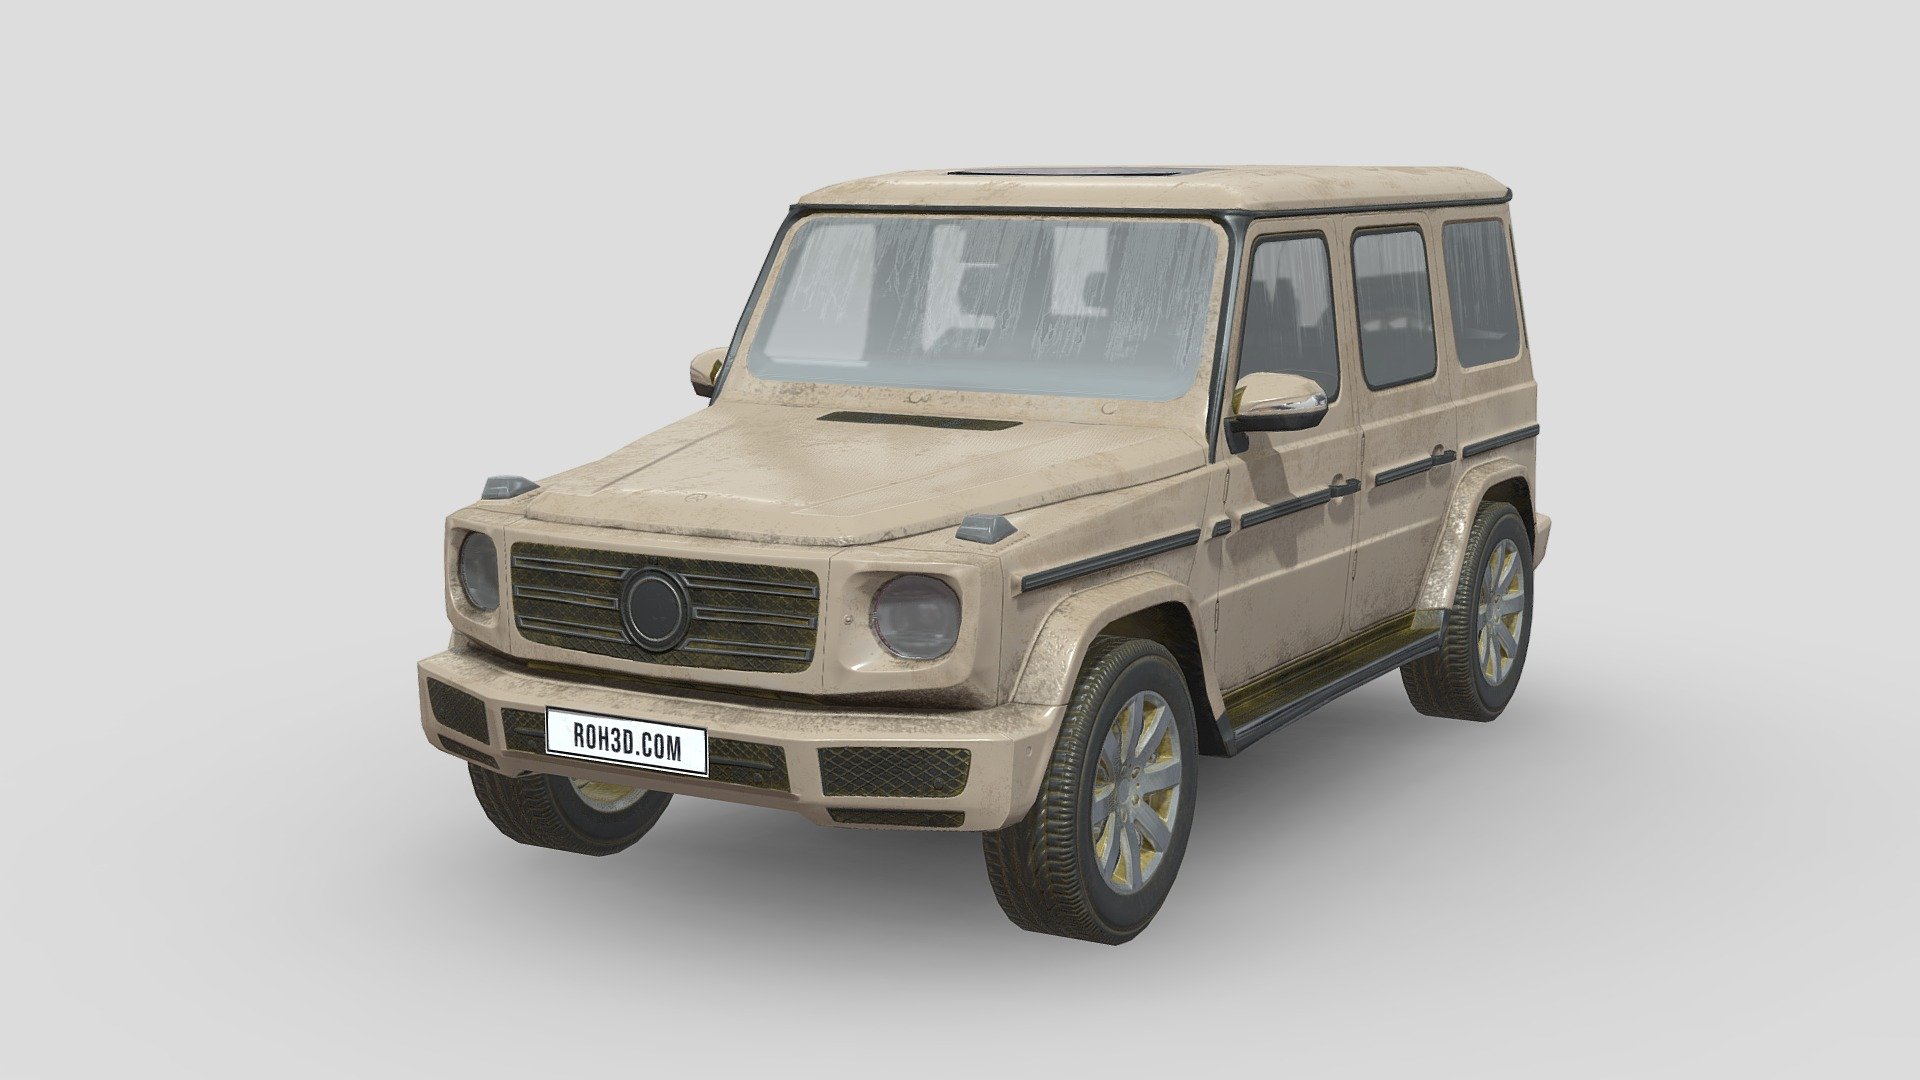 The Mercedes-Benz G-Class, in American English sometimes called G-Wagon, is a four-wheel drive automobile manufactured by Magna Steyr (formerly Steyr-Daimler-Puch) in Austria and sold by Mercedes-Benz. Originally developed as a military off-roader, later more luxurious models were added to the line. In certain markets, it has been sold under the Puch name as Puch G.

The G-Wagon is characterised by its boxy styling and body-on-frame construction. It uses three fully locking differentials, one of the few passenger car vehicles to have such a feature.

Despite the introduction of an intended replacement, the unibody SUV Mercedes-Benz GL-Class in 2006, the G-Class is still in production and is one of the longest-produced vehicles in Daimler's history, with a span of 42 years. Only the Unimog surpasses it 3d model